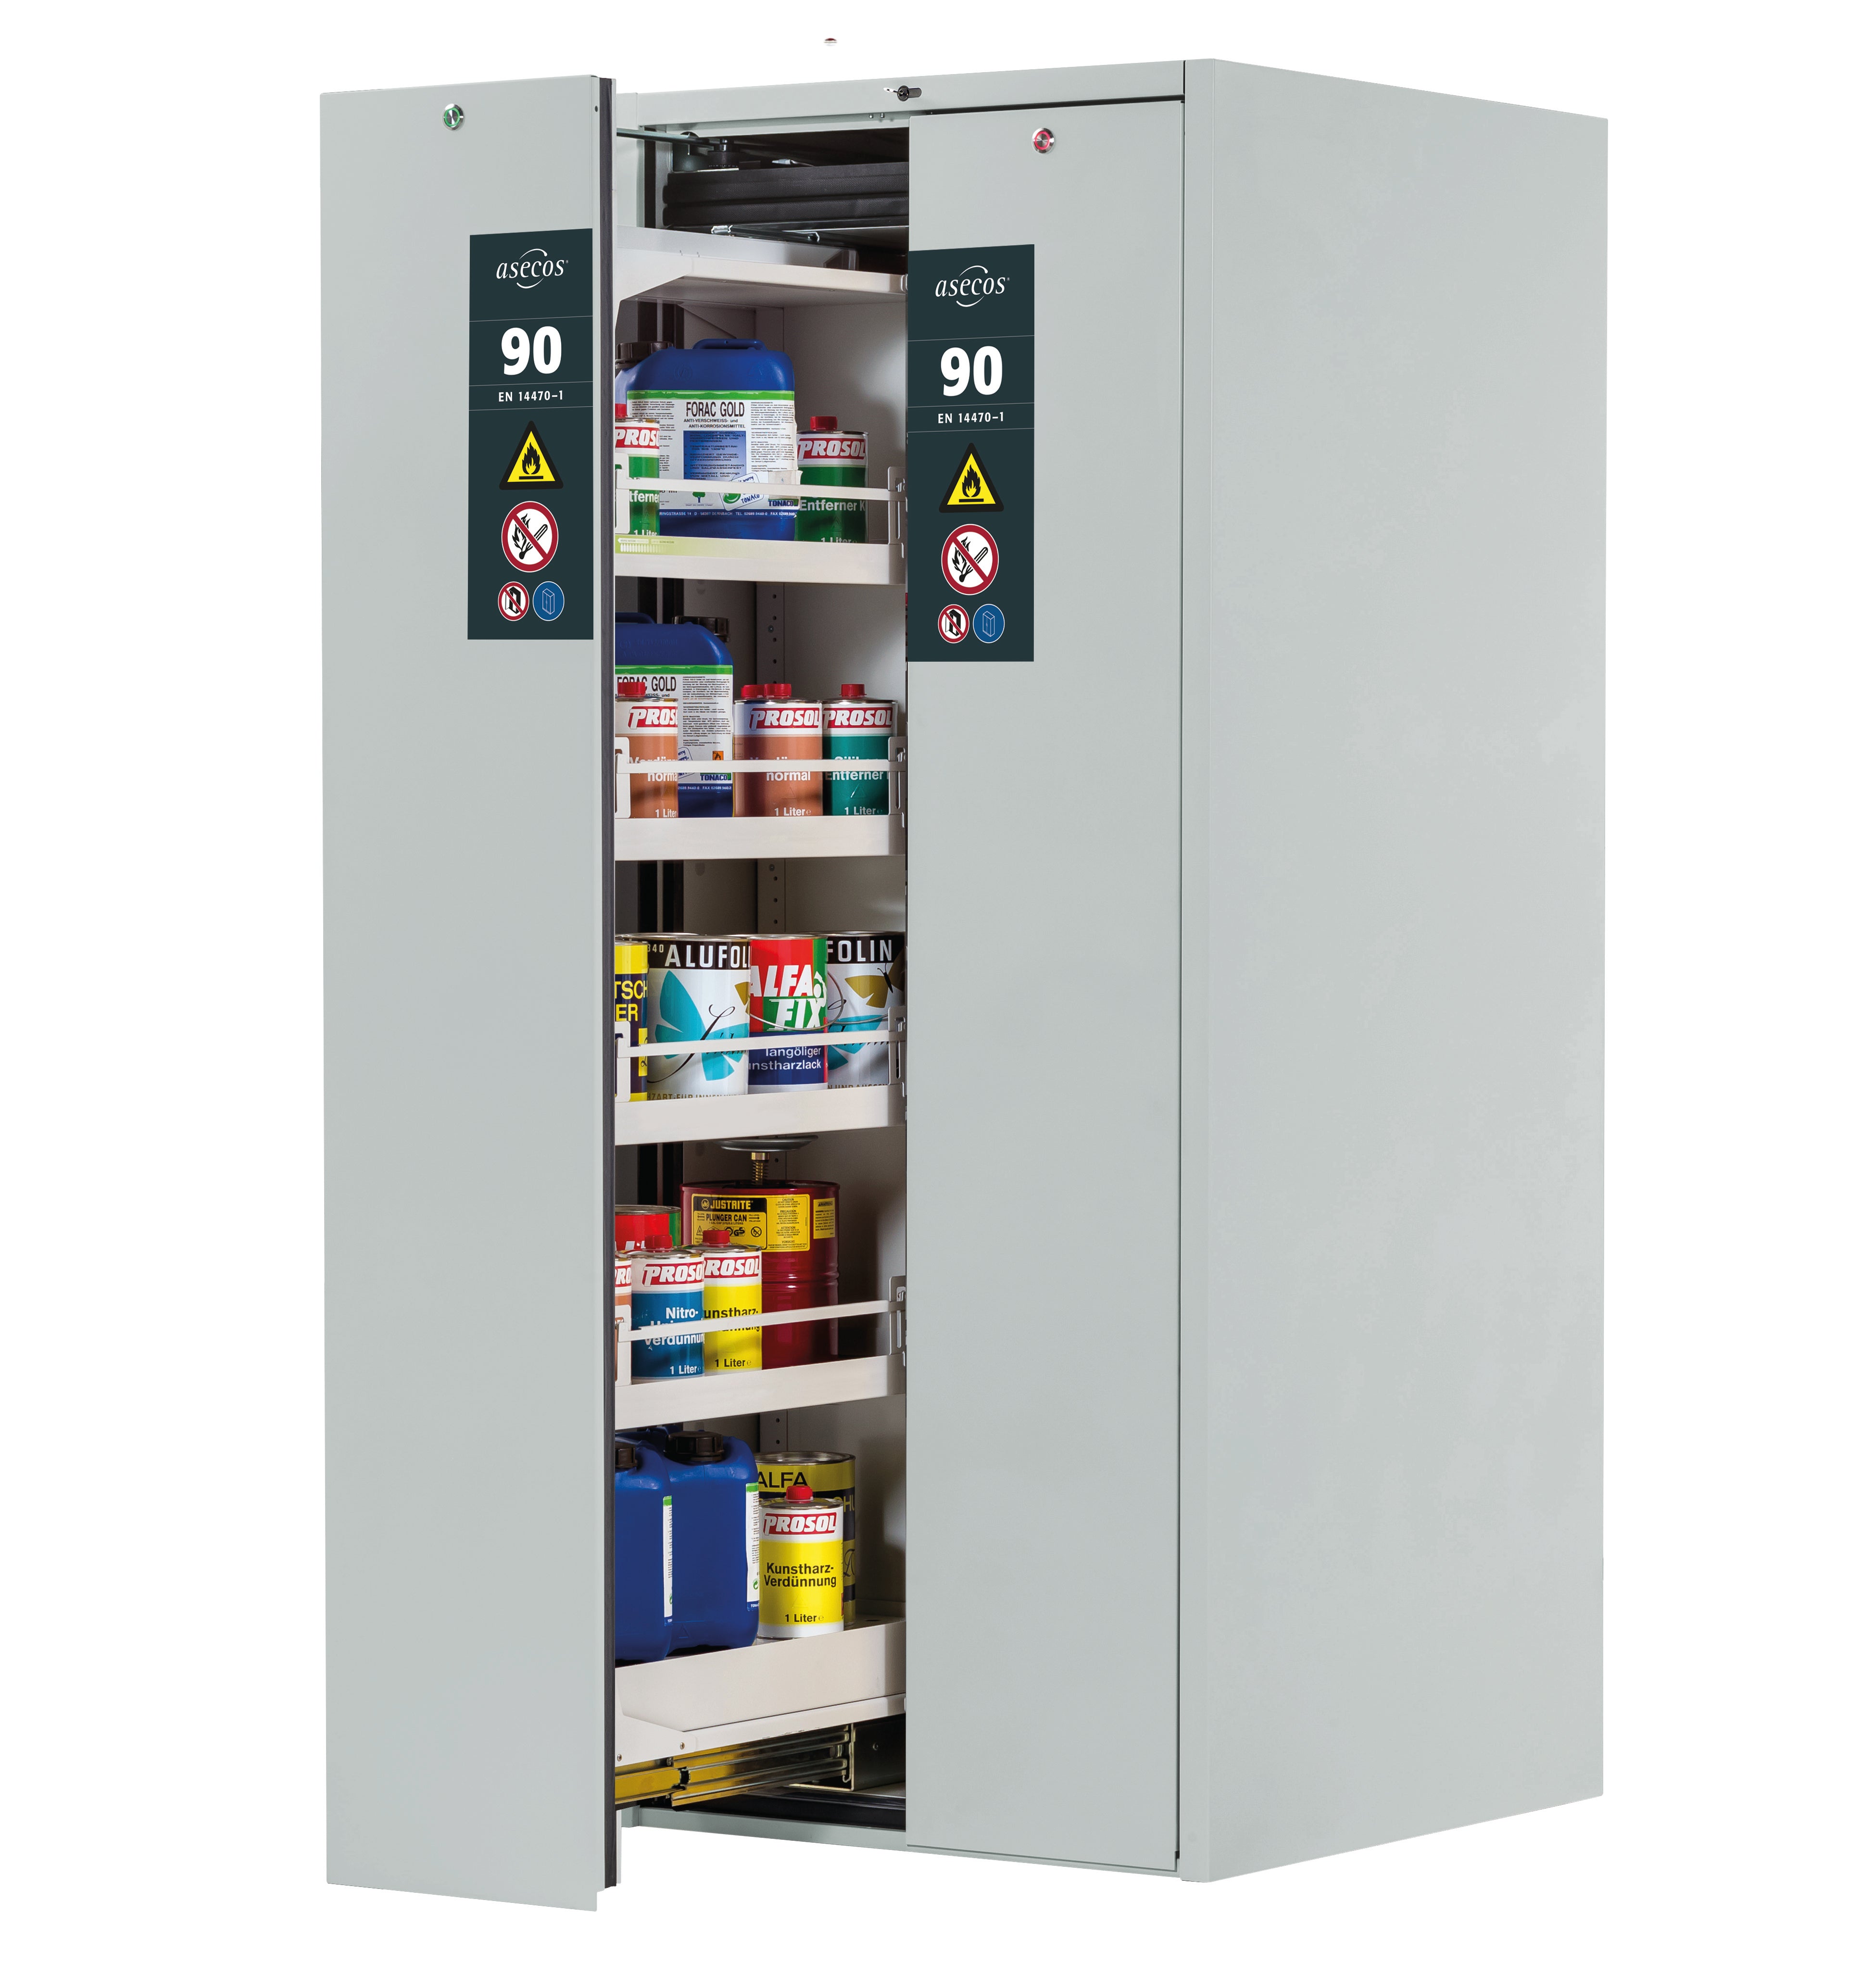 Type 90 safety cabinet V-MOVE-90 model V90.196.081.VDAC:0012 in light gray RAL 7035 with 4x standard tray base (sheet steel)